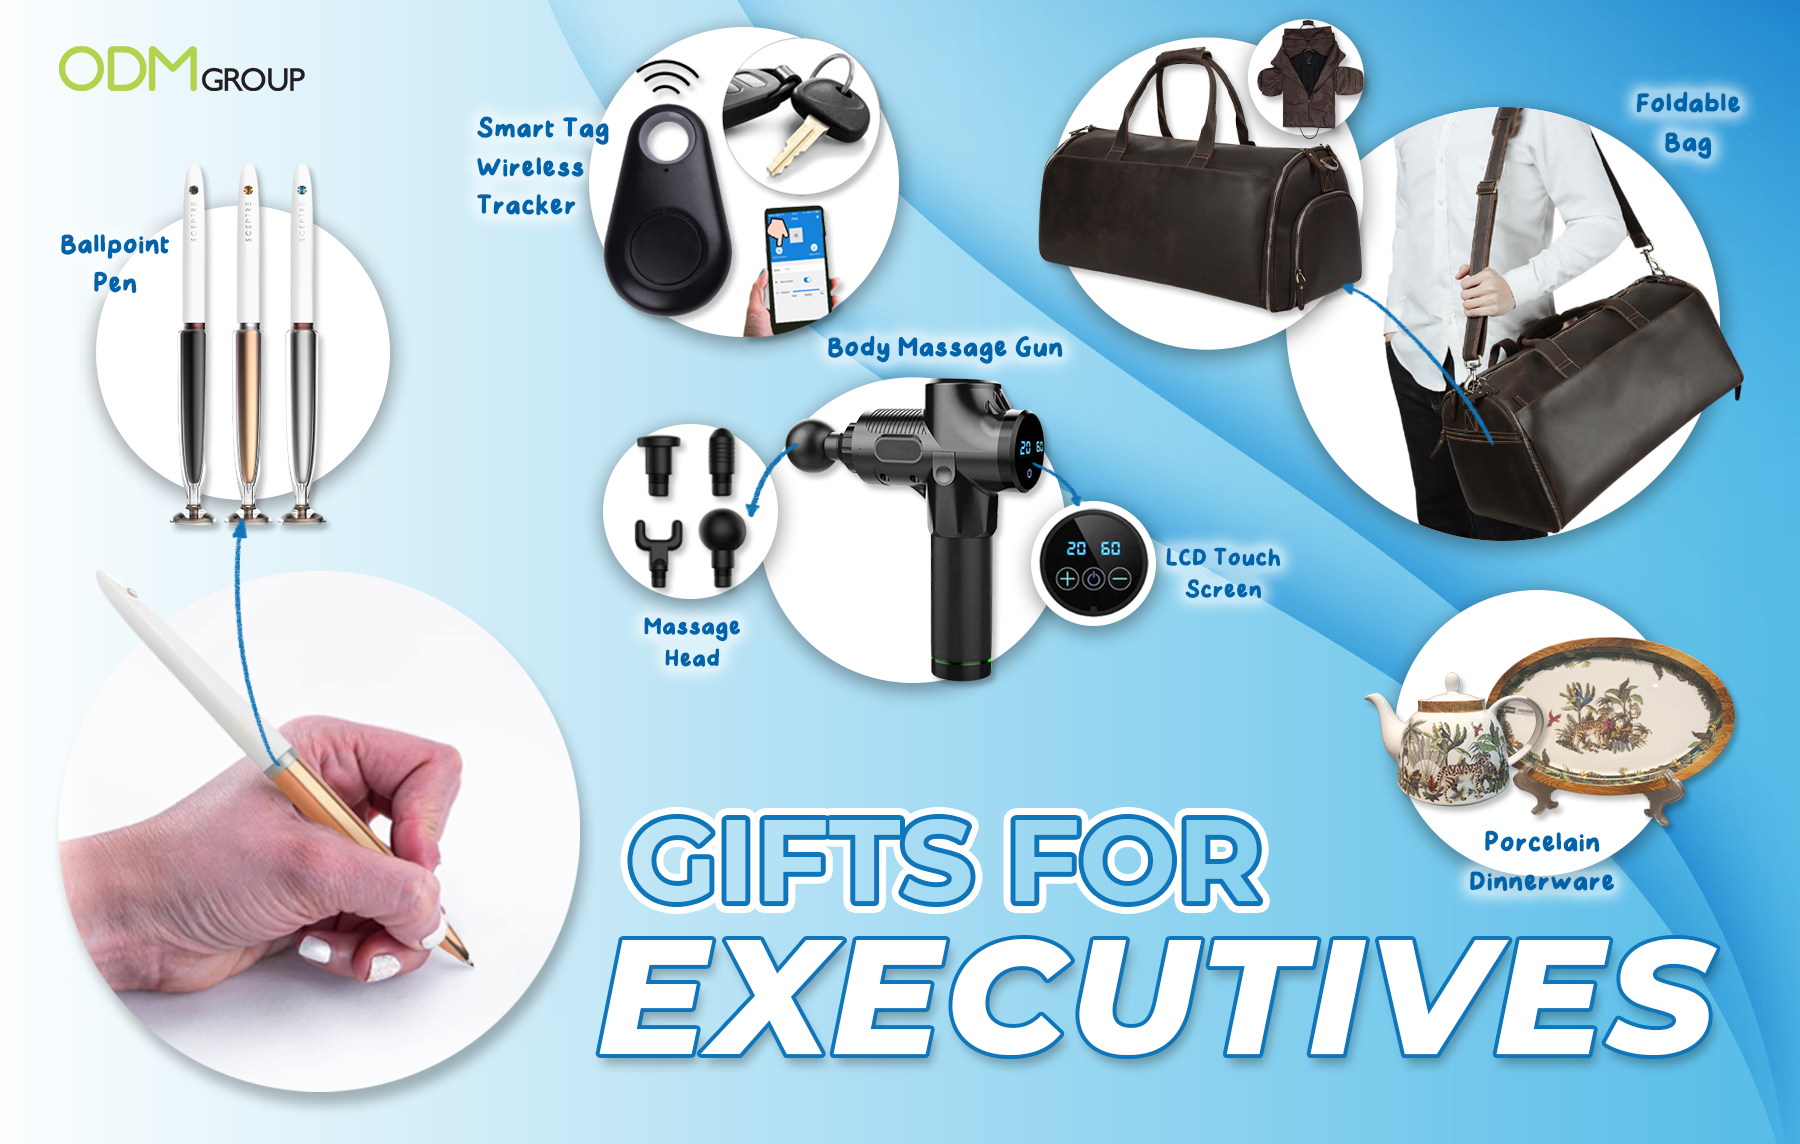 Collection of gifts for office staff including smart tag, body massage gun, ballpoint pens, and a foldable bag.